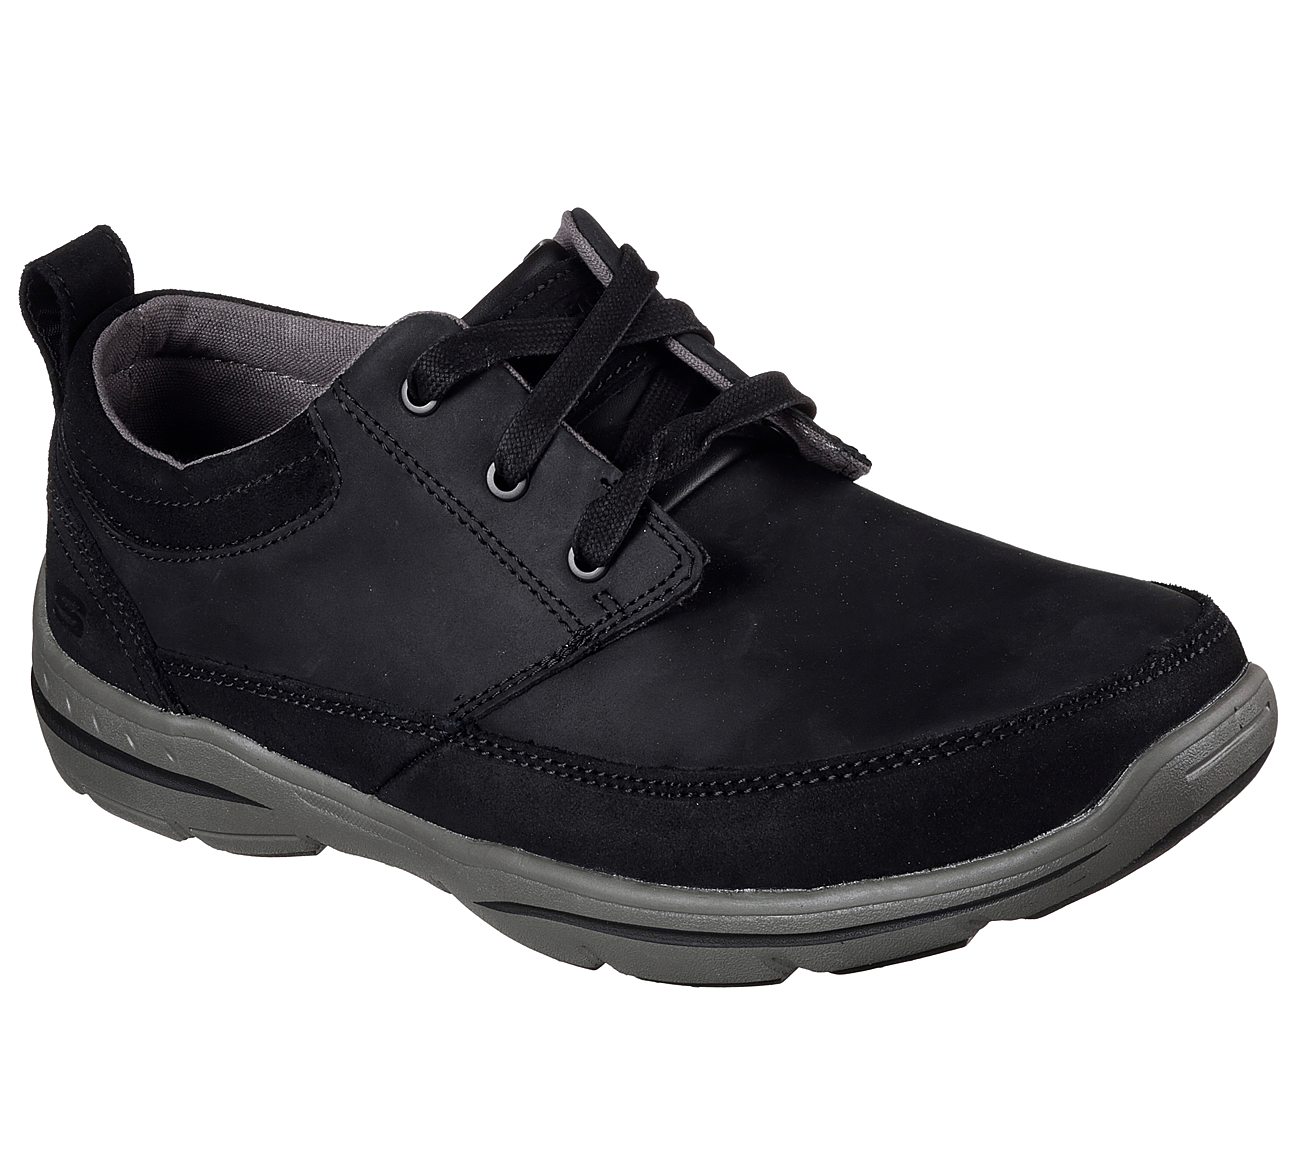 skechers relaxed fit review